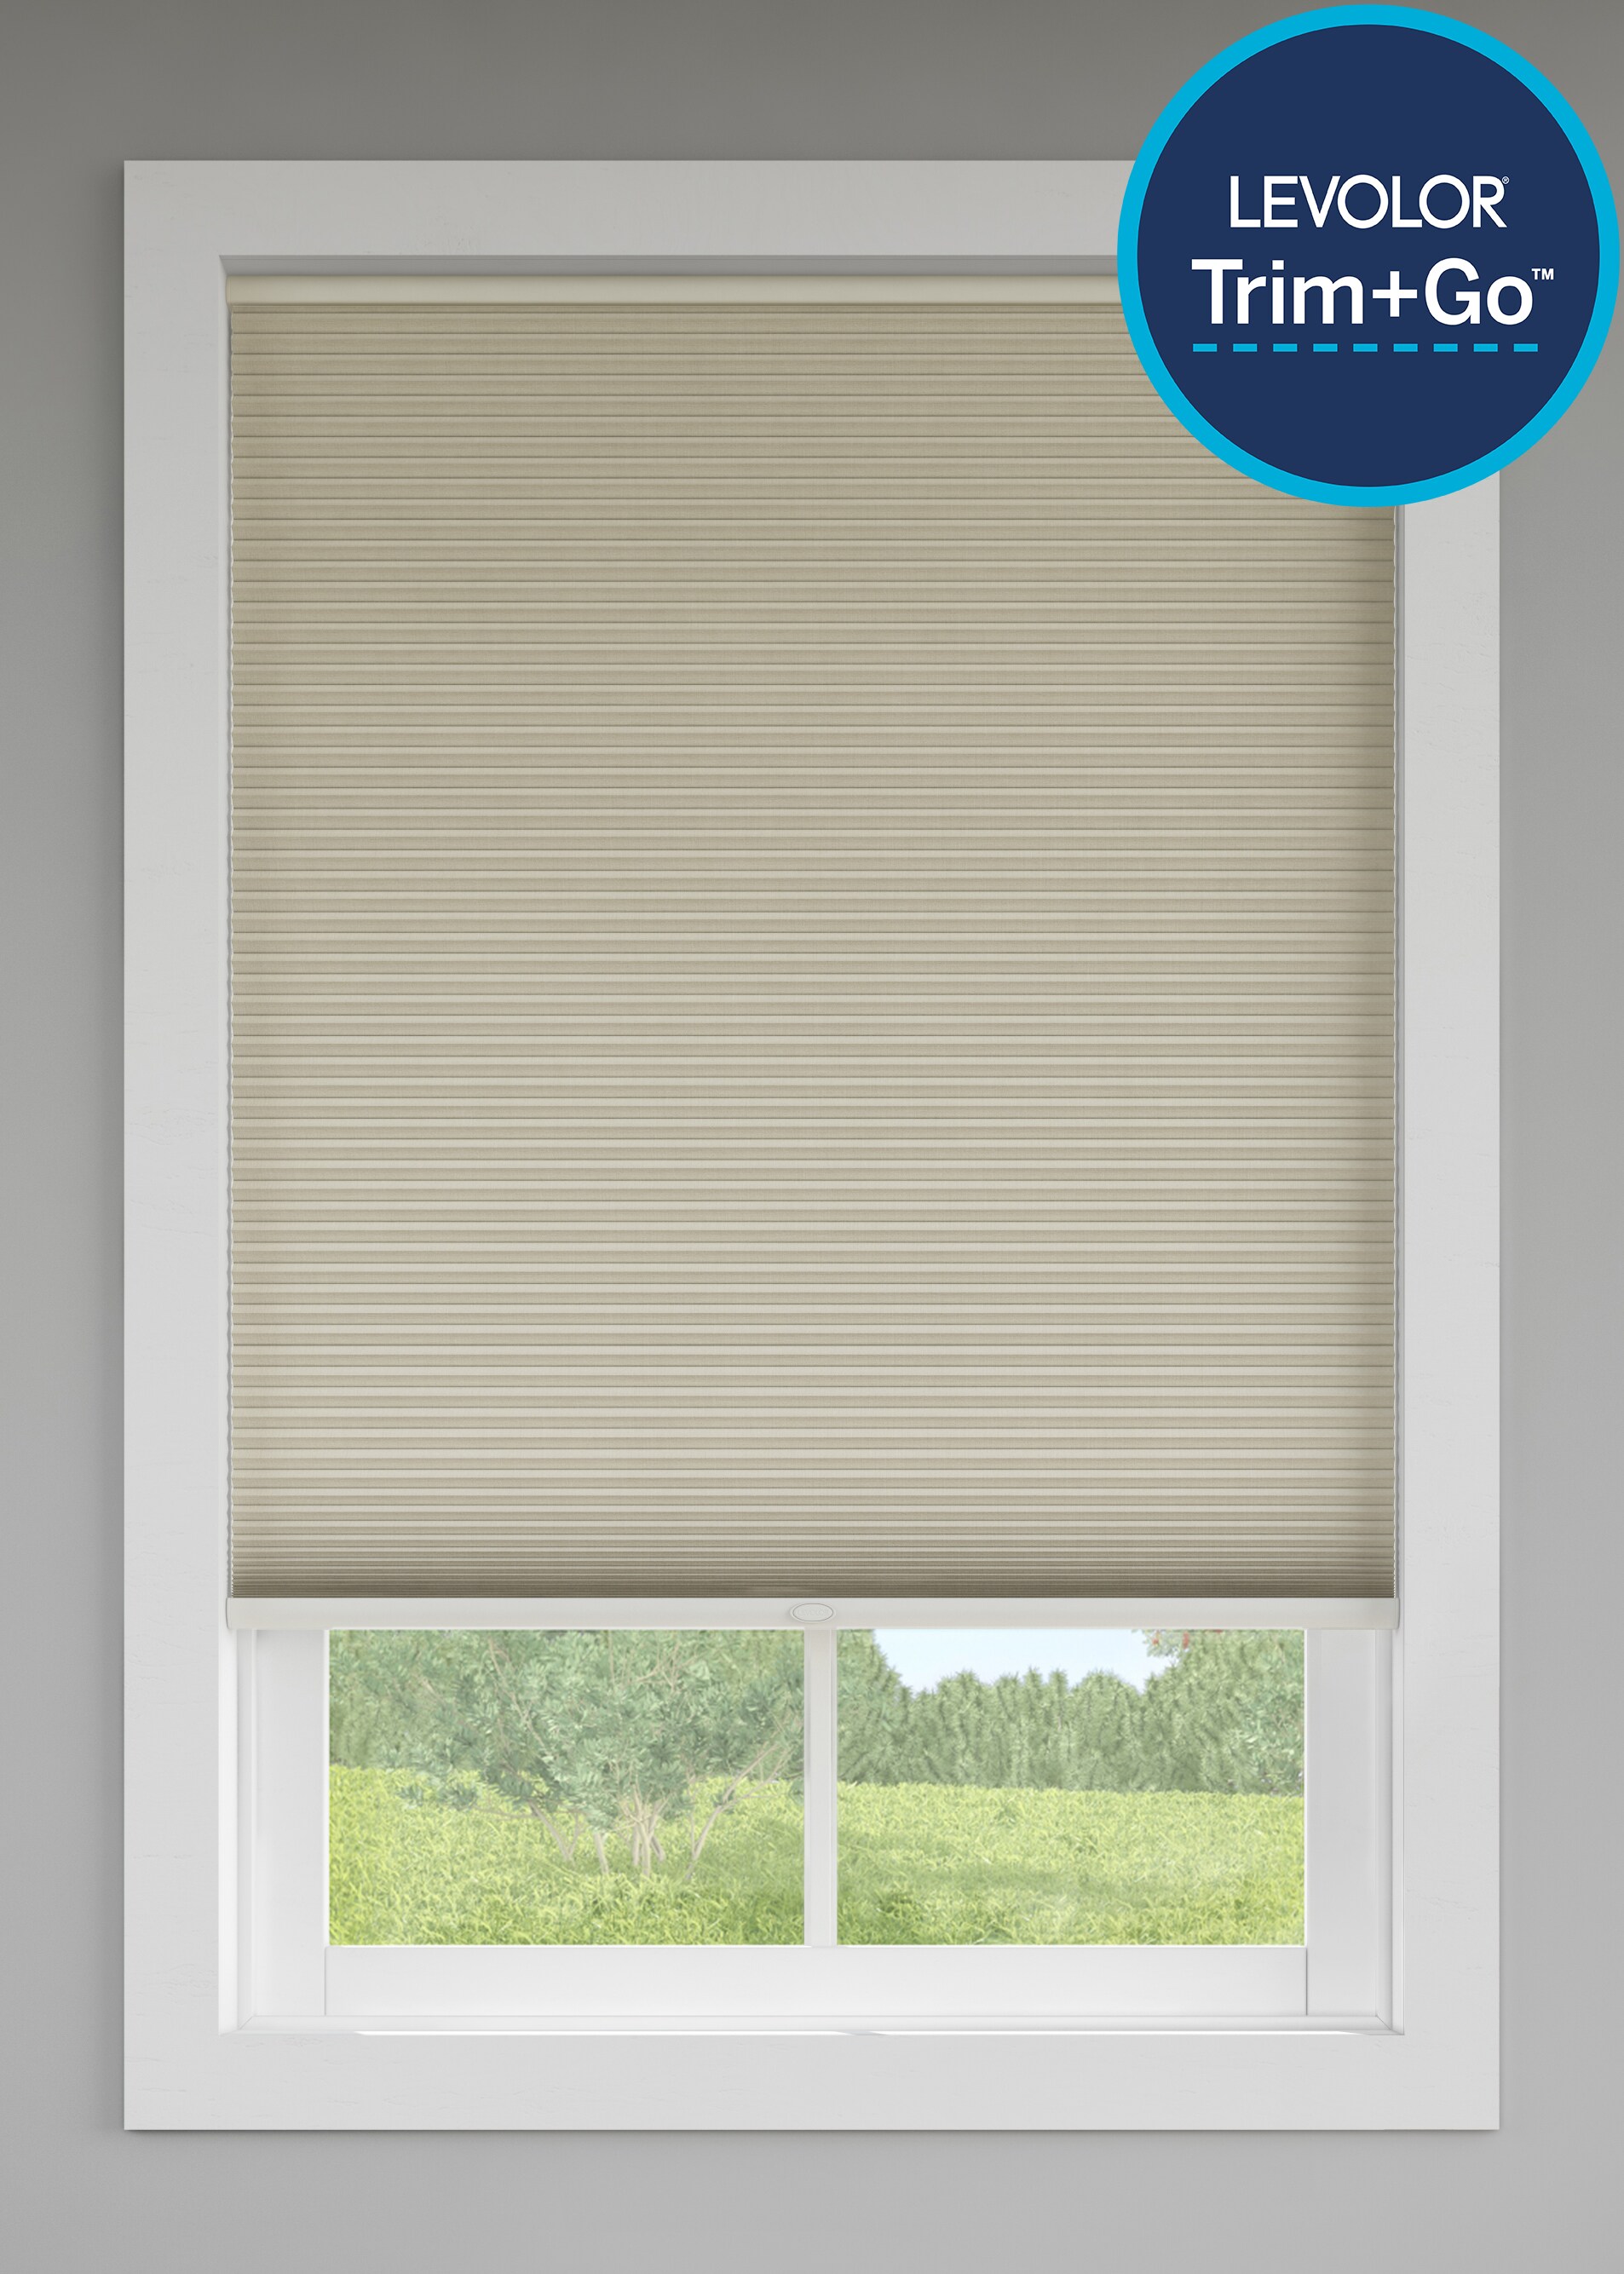 Cordless Honeycomb & Cell Shades 3-Shade & Mini Blind Brackets For Cord Loop